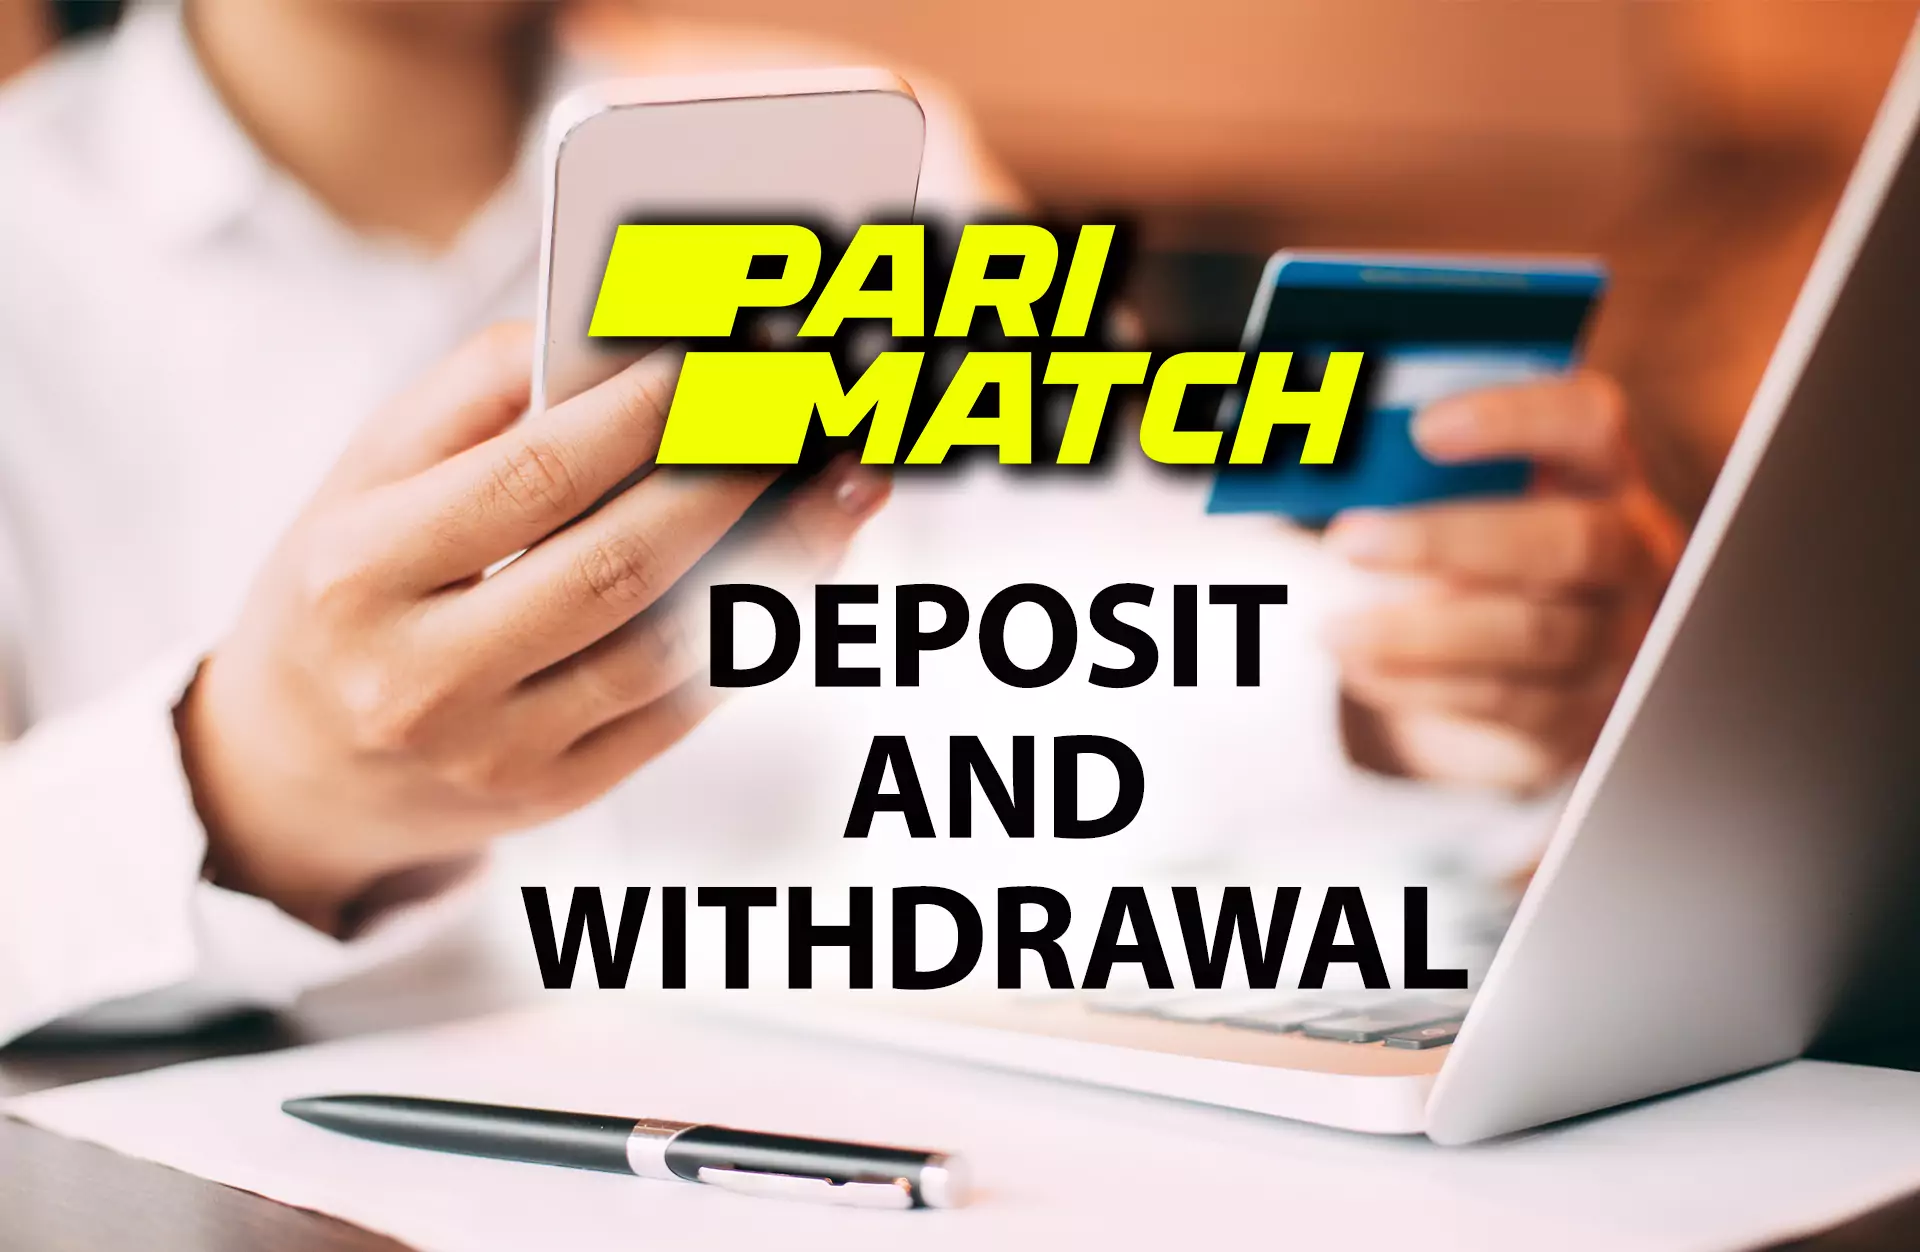 There are a lot of Parimatch withdrawal and deposit methods.